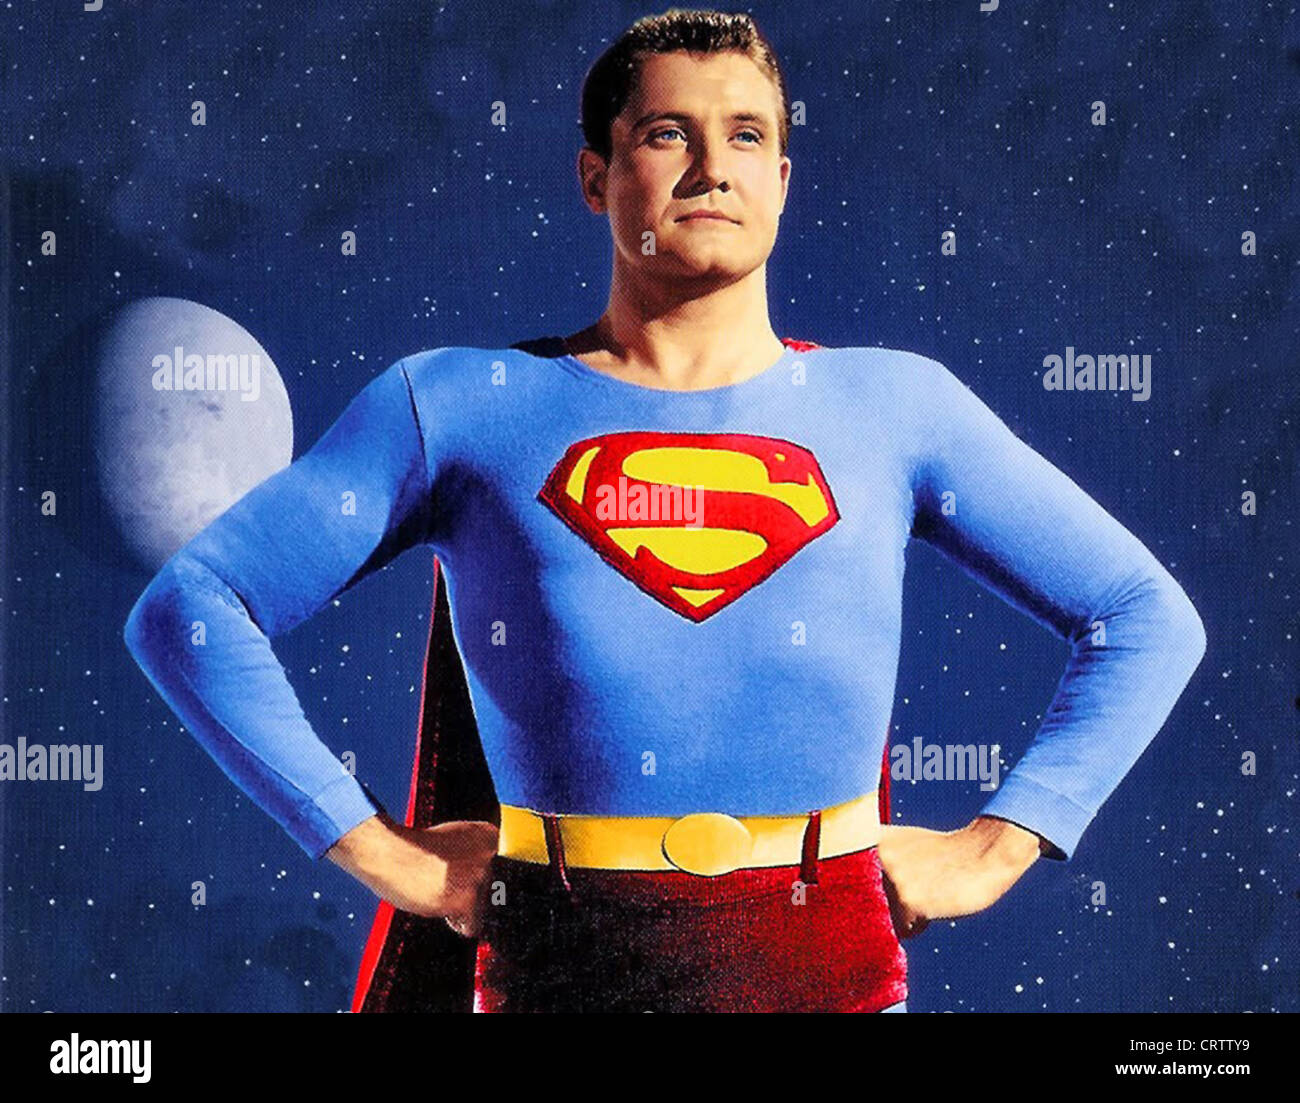 ADVENTURES OF SUPERMAN (TV) (1952) GEORGE REEVES, 001 MOVIESTORE COLLECTION LTD Stock Photo